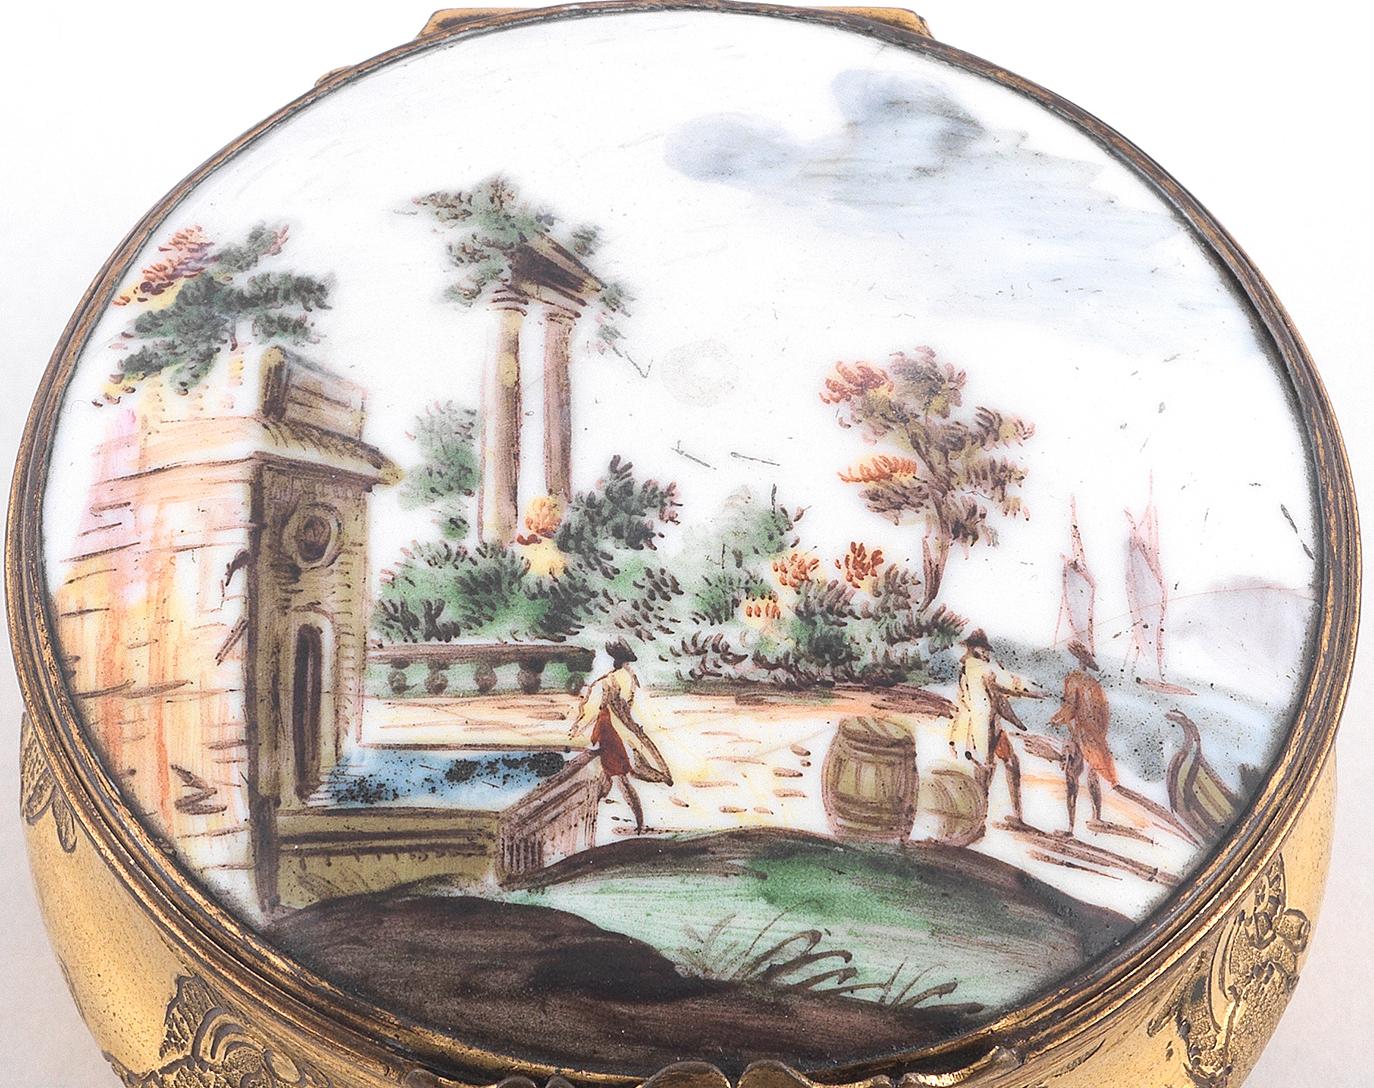 SHIPPING POLICY:
No additional costs will be added to this order.
Shipping costs will be totally covered by the seller (customs duties included). 

The cover set with an enamel panel depicting a harbour Capriccio, the underside painted with a